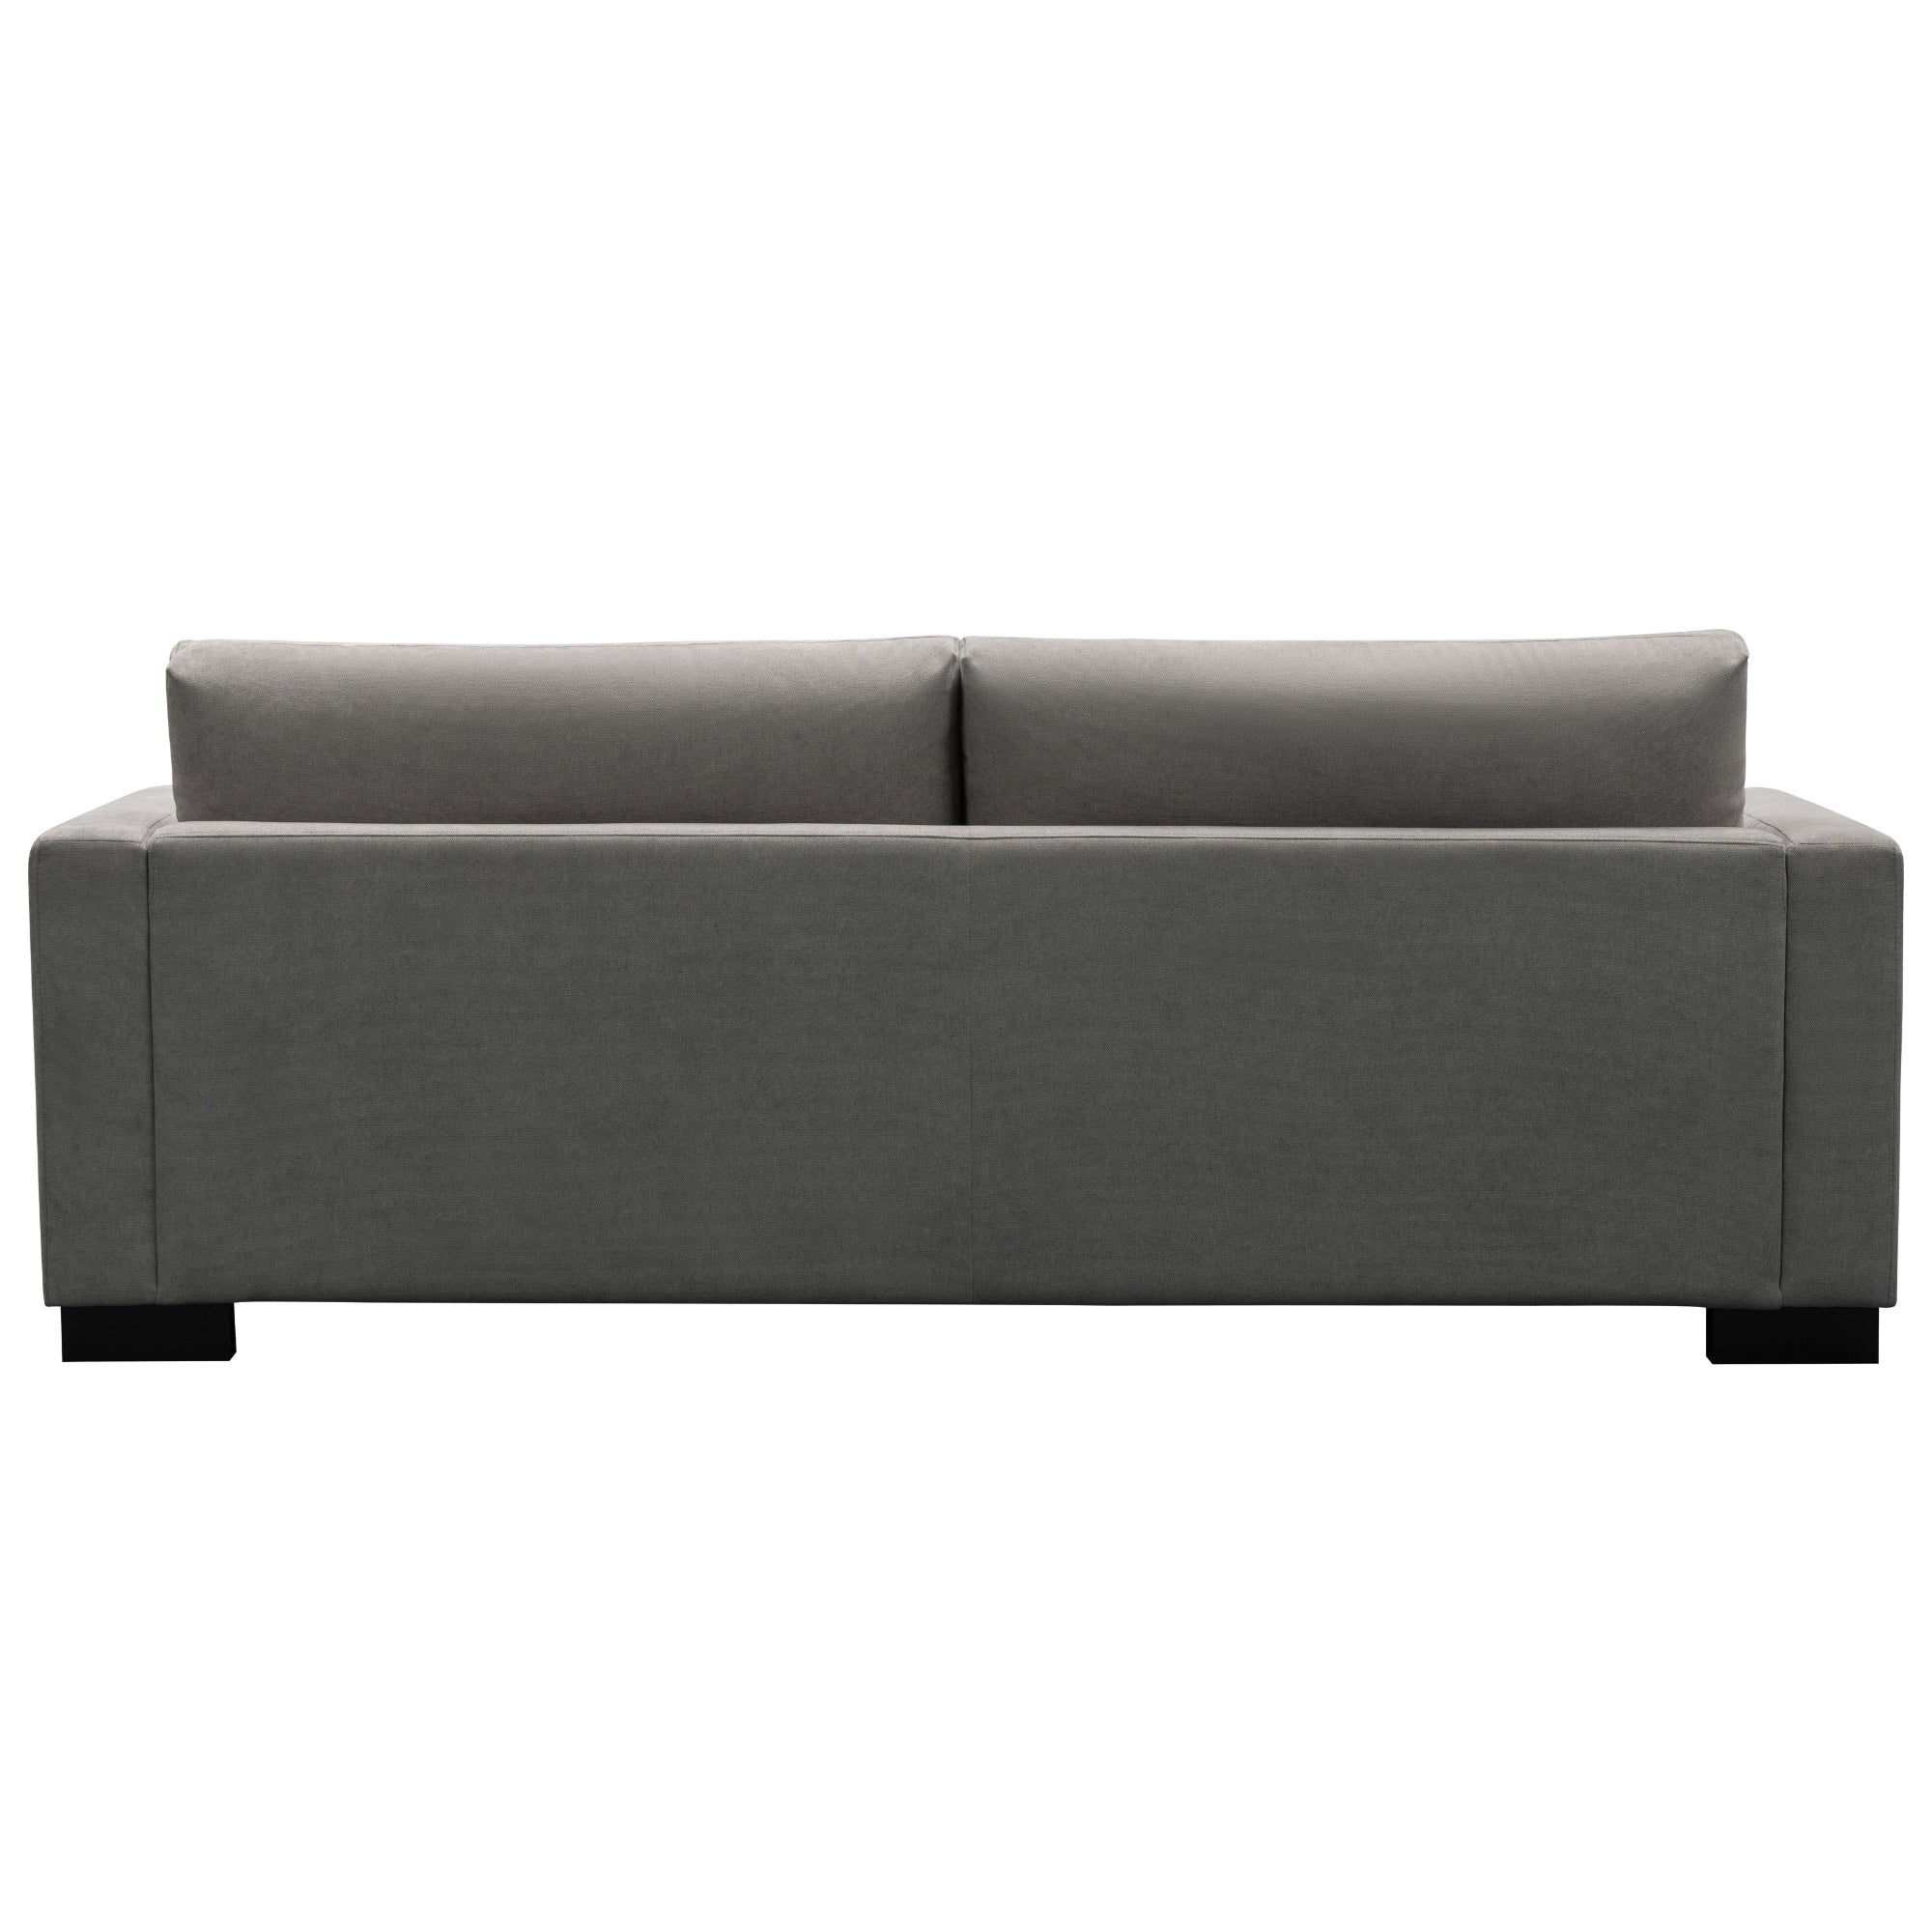 Light Grey 3-Seater Sofa with Deep Seating & Wood Legs